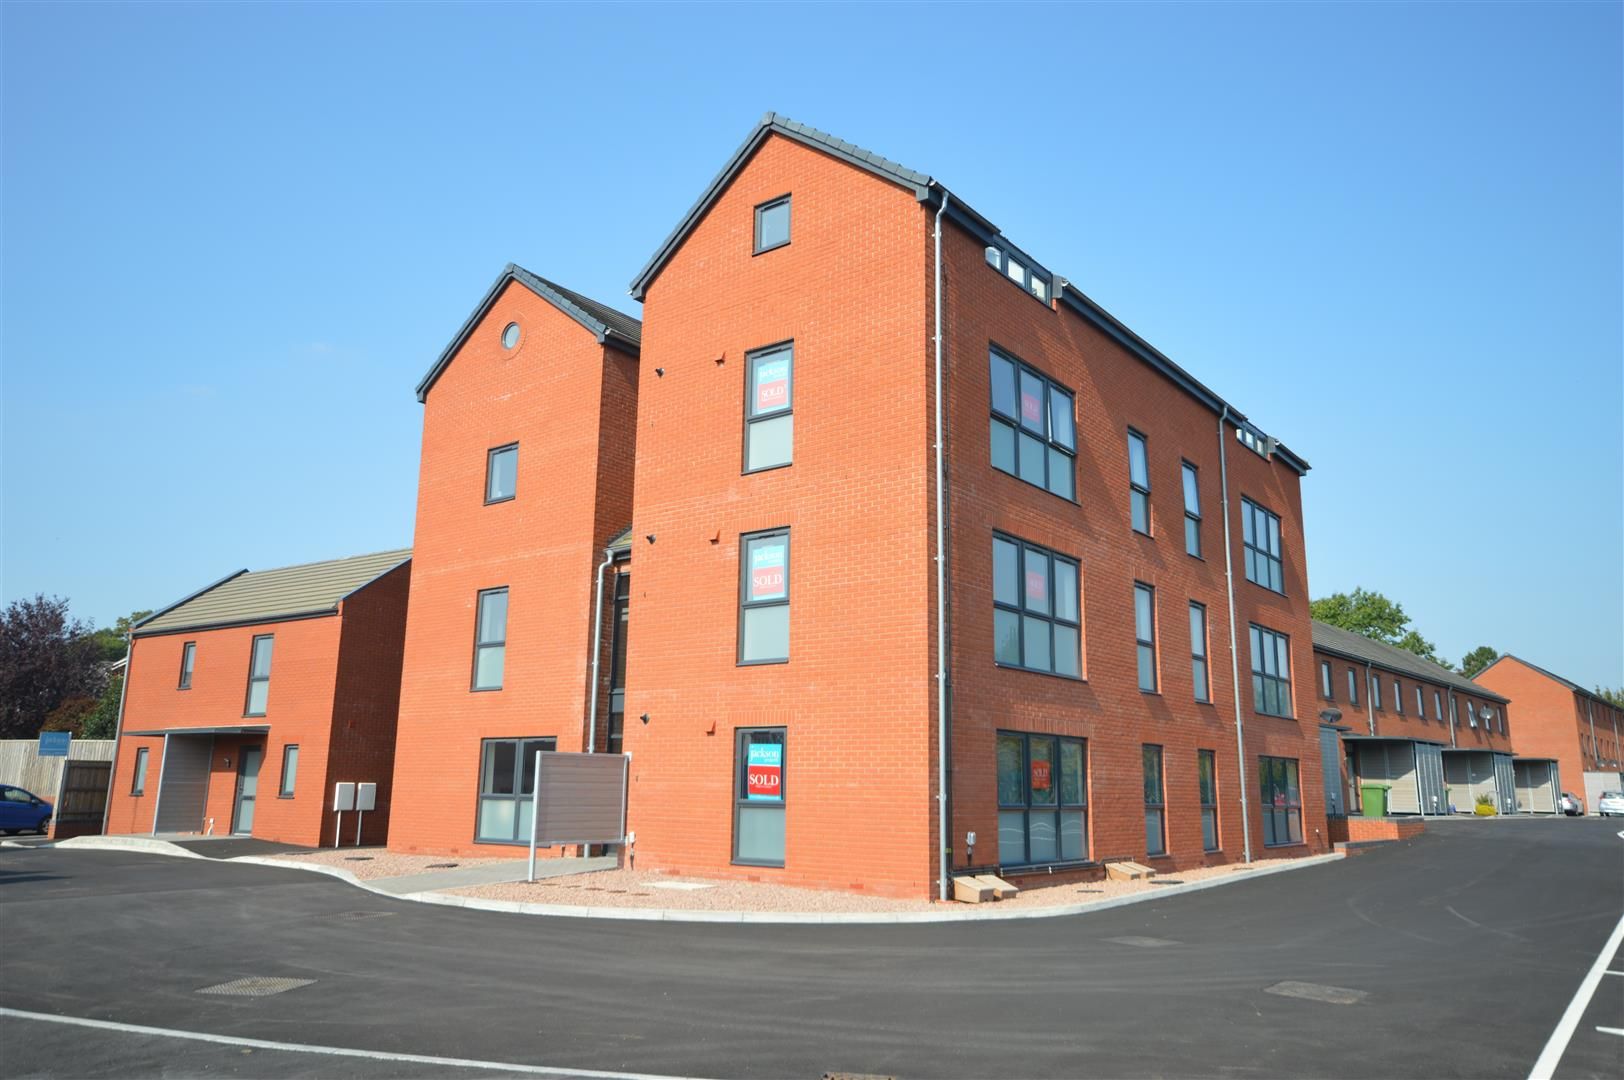 1 bed apartment for sale in Leominster, HR6